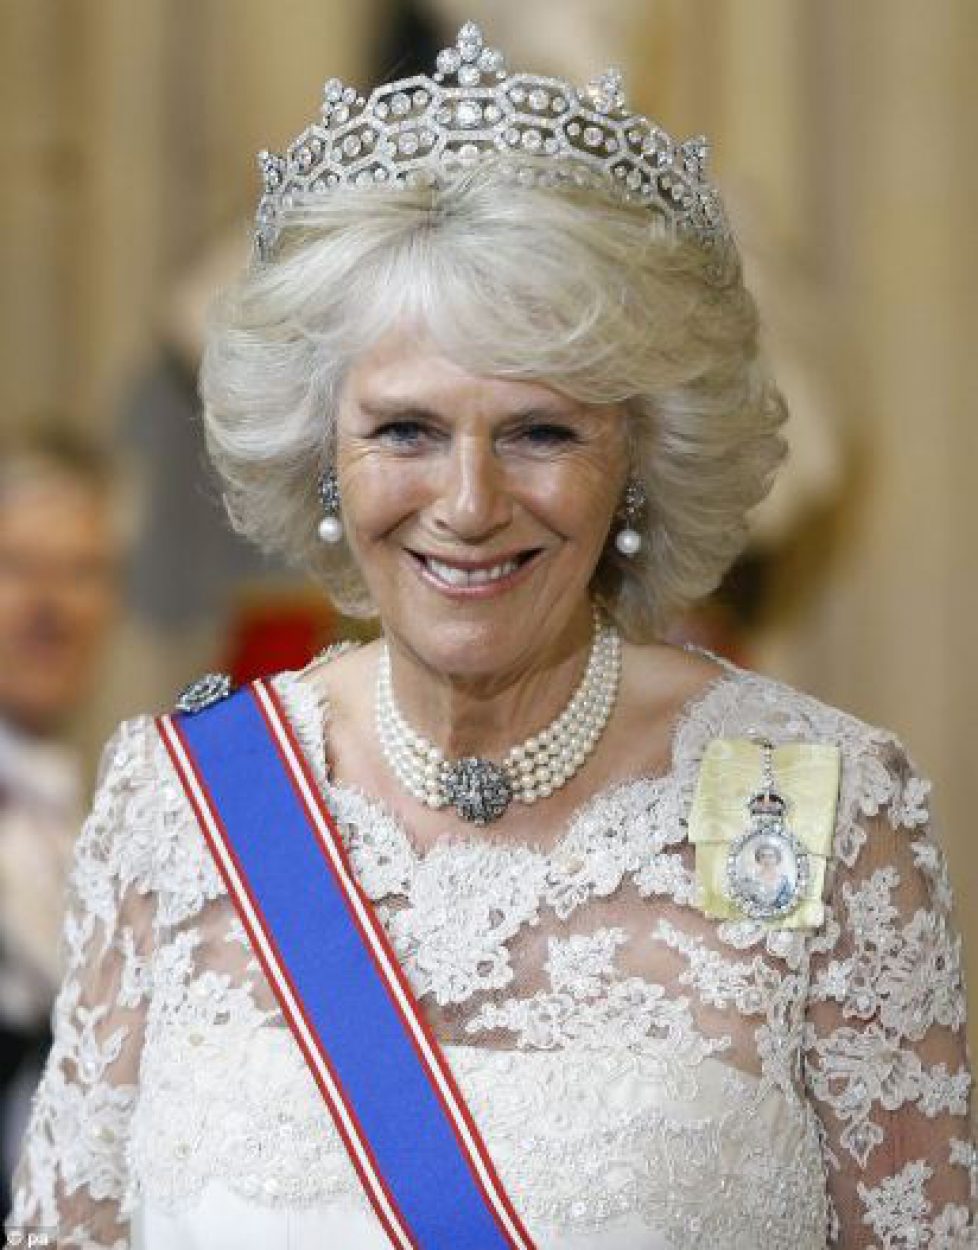 01-Glowing-The-Duchess-of-Cornwall-flashes-a-smile-and-her-beautiful-jewellery-photocPA